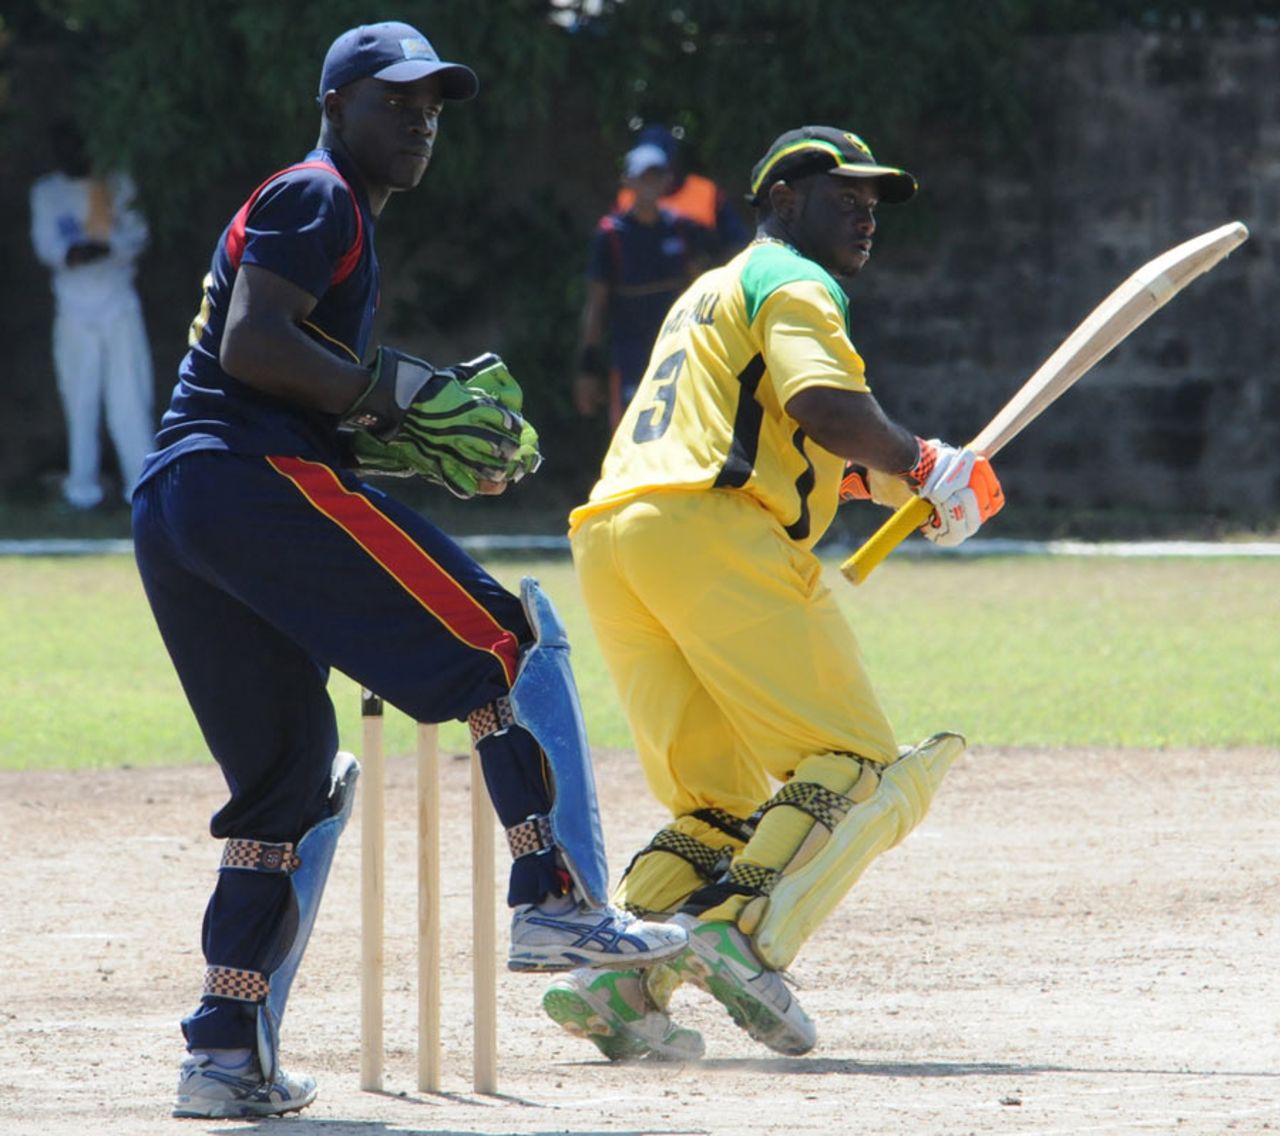 Xavier Marshall cuts on his way to 75, Combined Campuses and Colleges v Jamaica, Group A match, WICB Cup, Kensington Park, Kingston, October 18, 2010